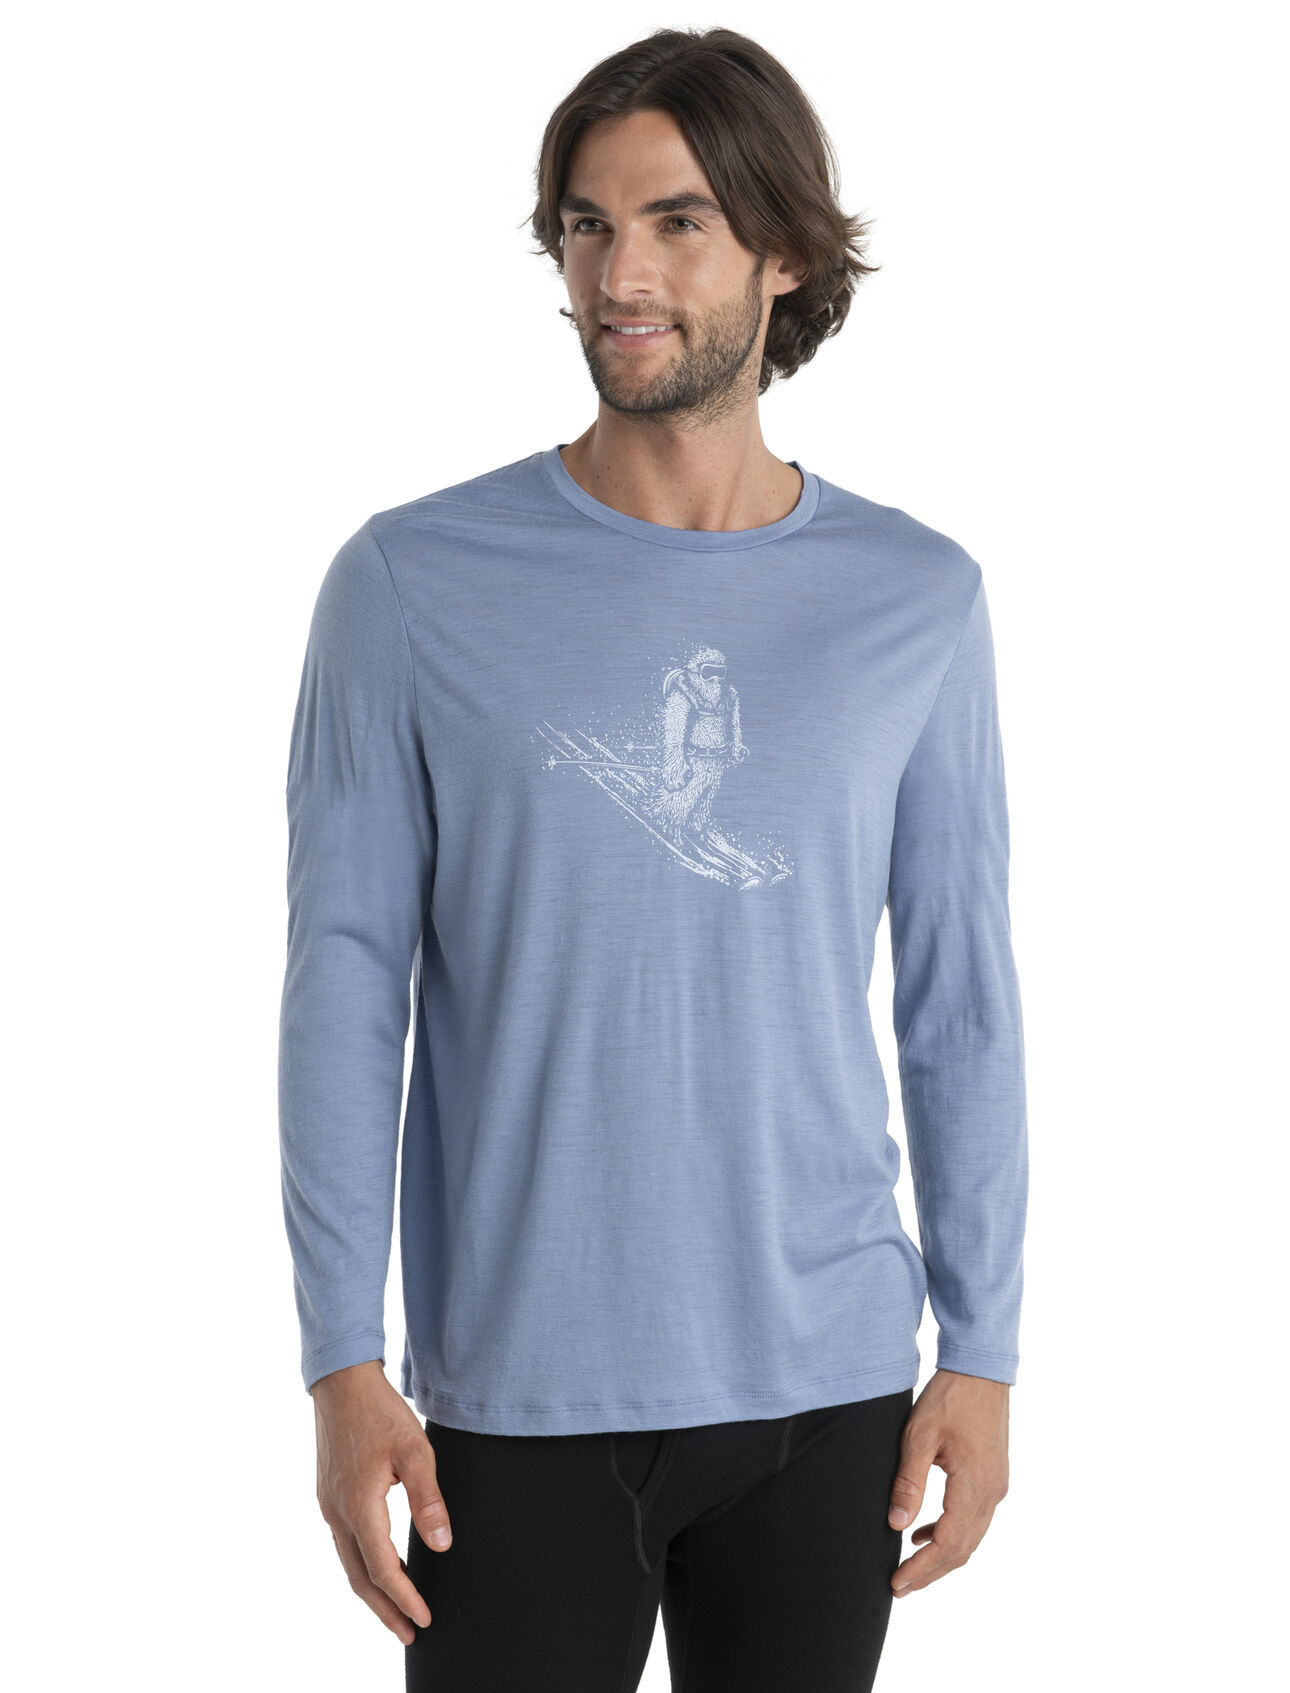 Mens Merino Tech Lite II Long Sleeve T-Shirt Skiing Yeti Our versatile tech tee that provides comfort, breathability and natural odor-resistance for any adventure you can think of, the Tech Lite II Long Sleeve Tee Skiing Yeti features 100% merino for all-natural performance. The original artwork by Damon Watters features a fun illustration of the ultimate mountain dweller enjoying some turns.